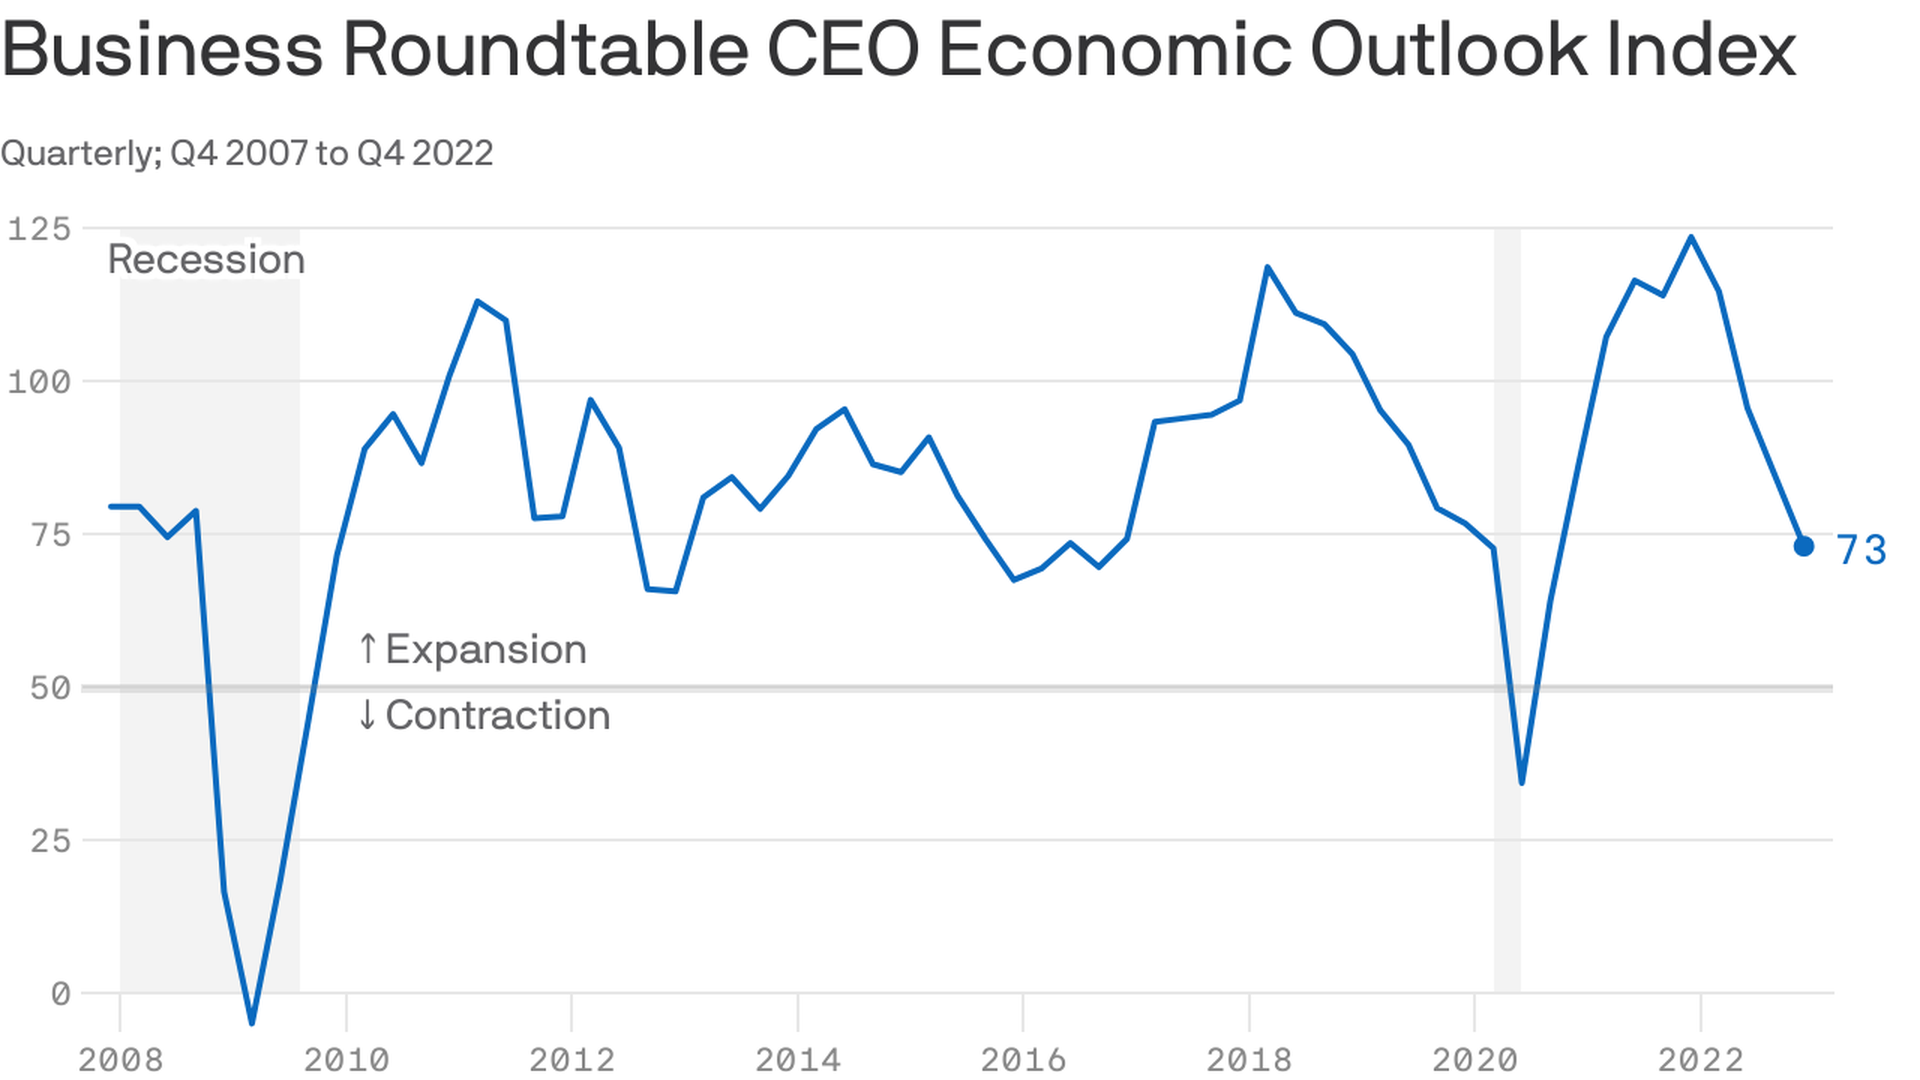 A chart showing Business Roundtable CEO Economic Outlook Index.